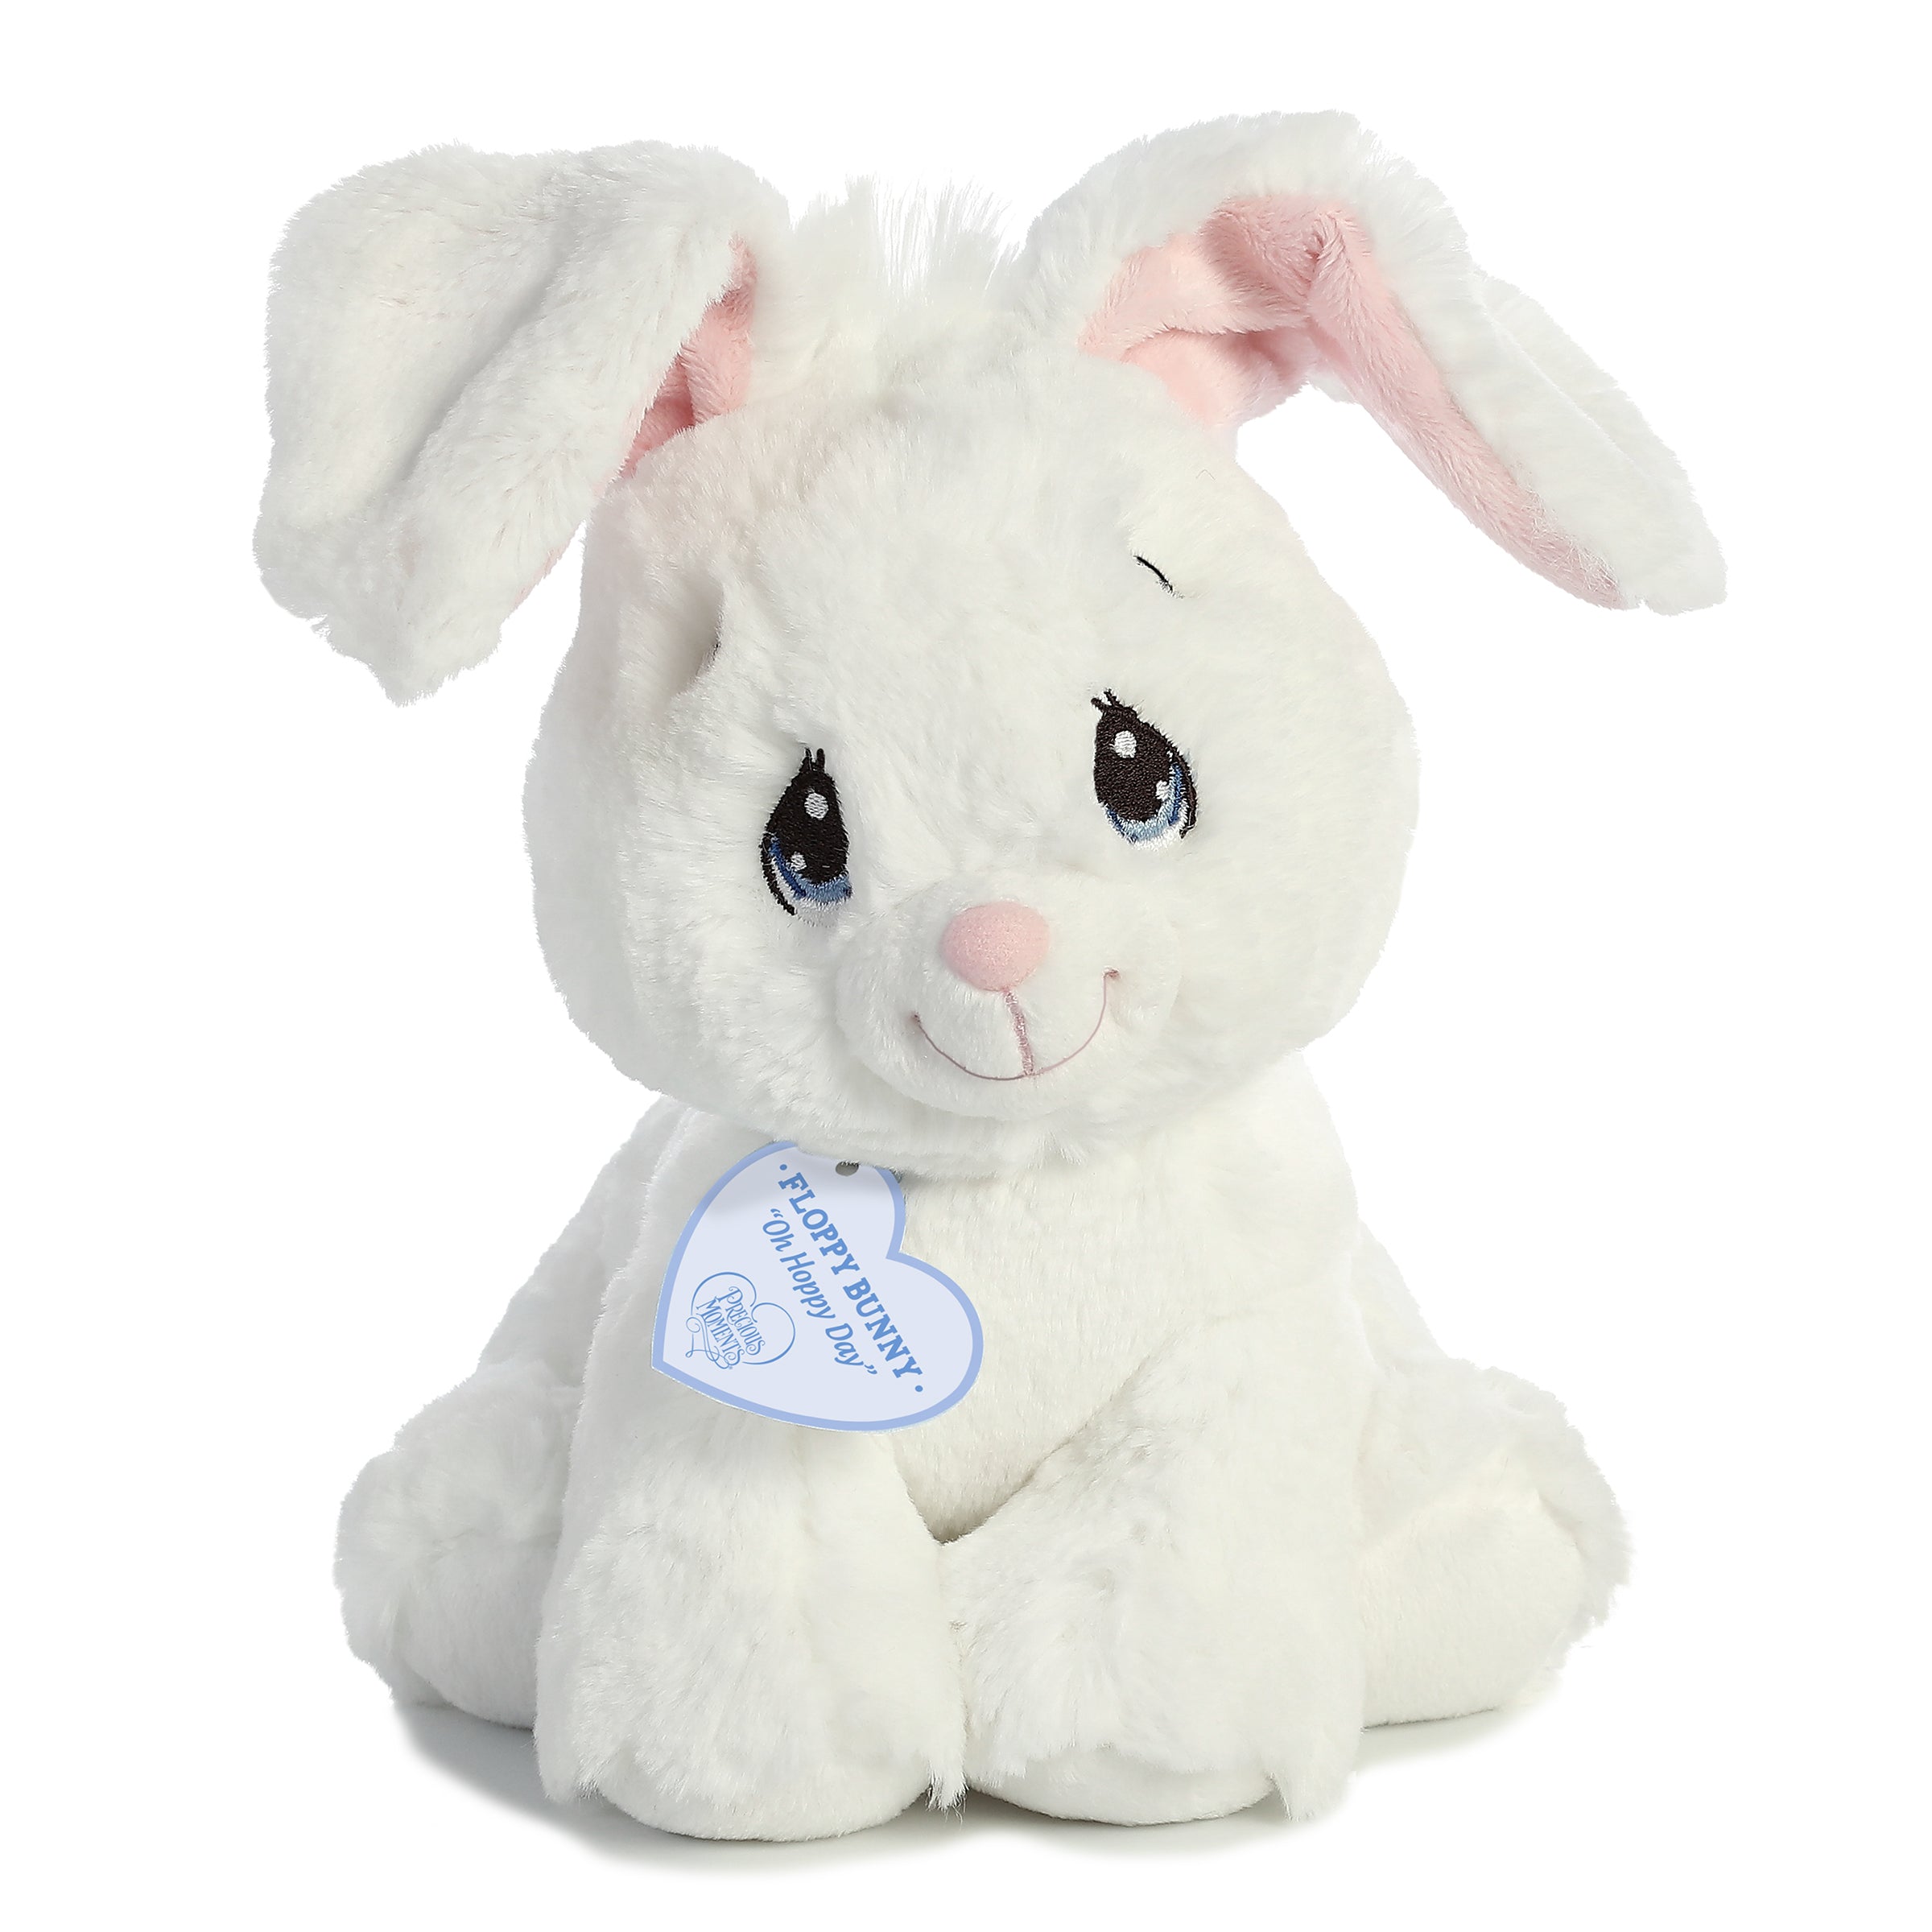 White Floppy Bunny plush from Precious Moments, soft tan fabric, detailed for comfort and memory-making